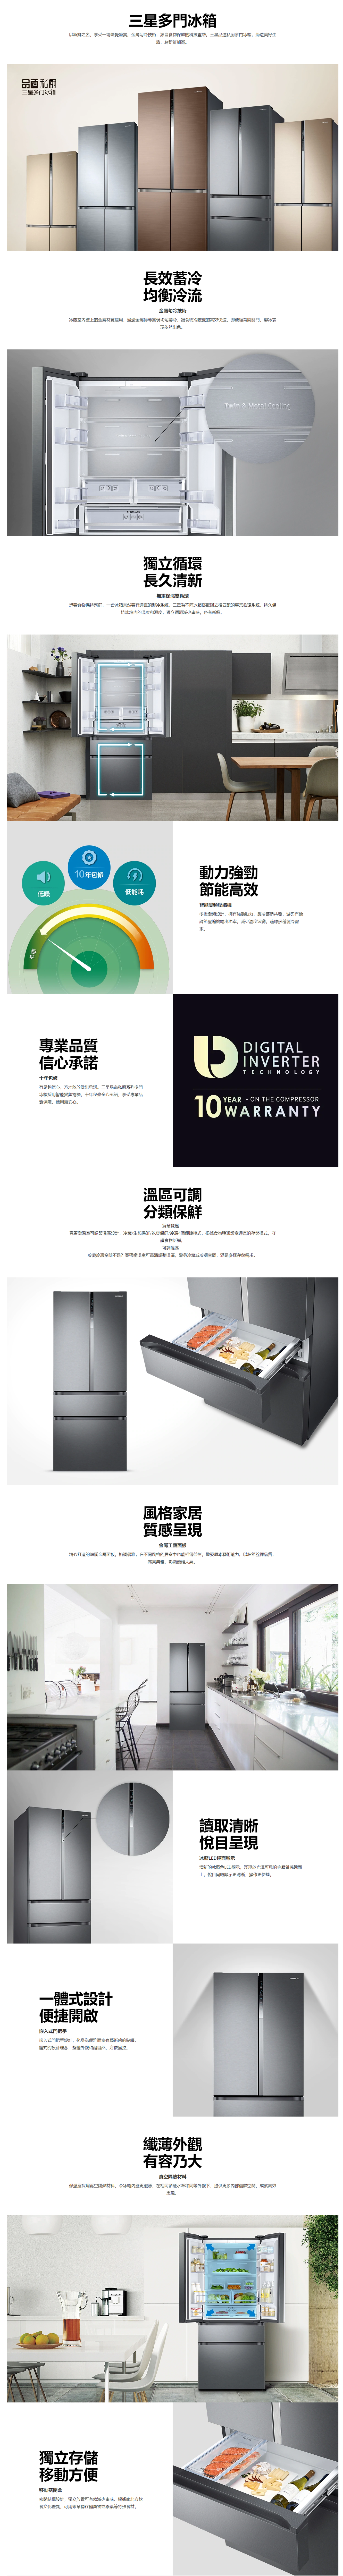 【Discontinued】Samsung RF50N5860B1 461L Multi-door Refrigerator *(The customer must do the inspectaction after the decoration is completed. If there is no decoration, it must be inspected again. Fee $110）